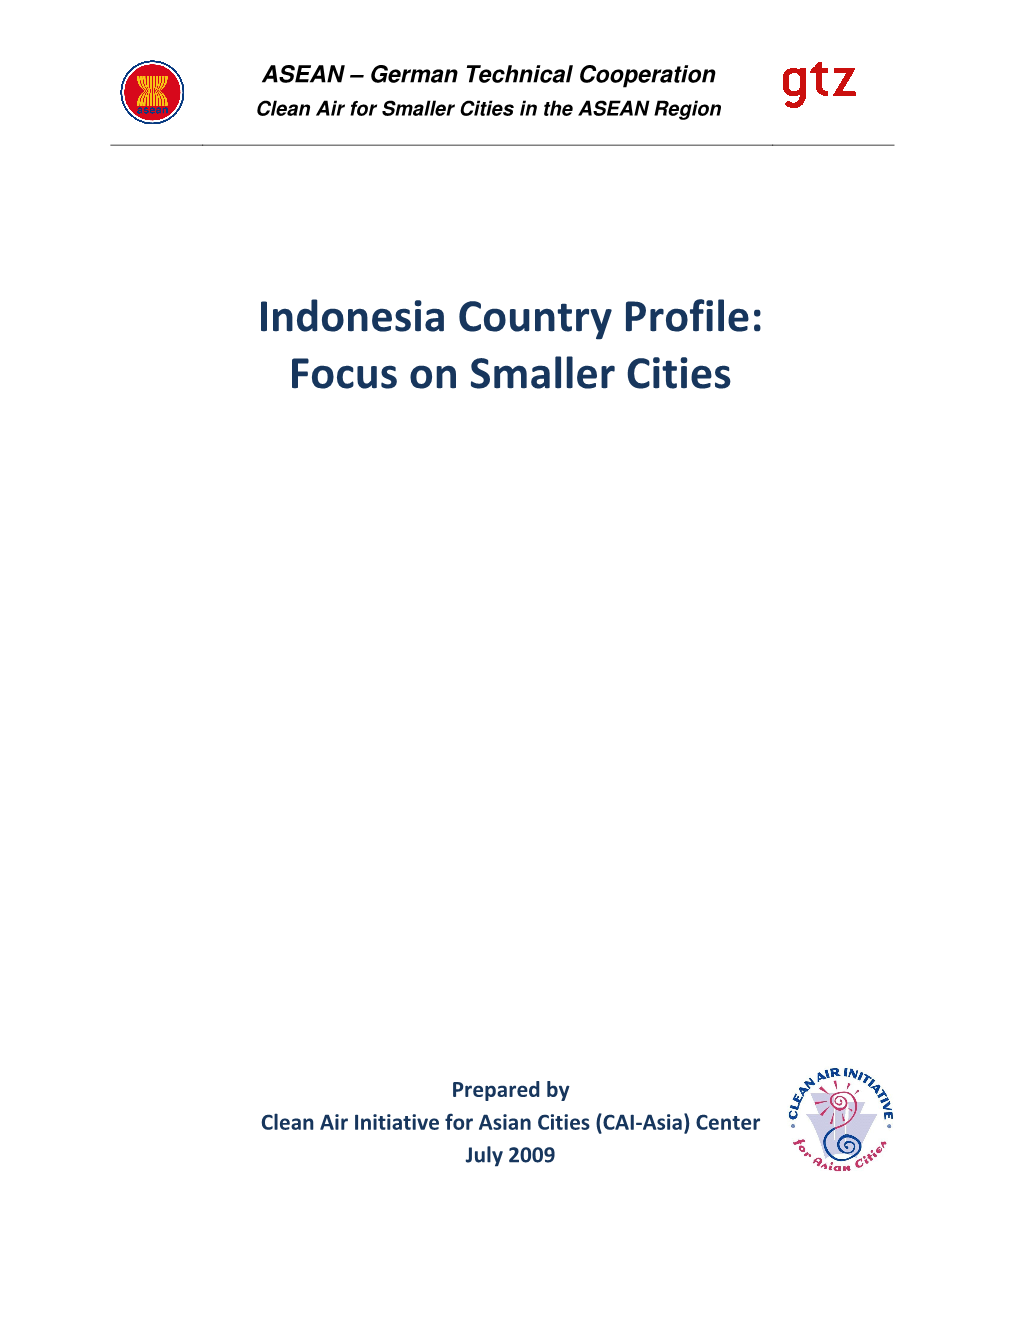 Indonesia Country Profile: Focus on Smaller Cities